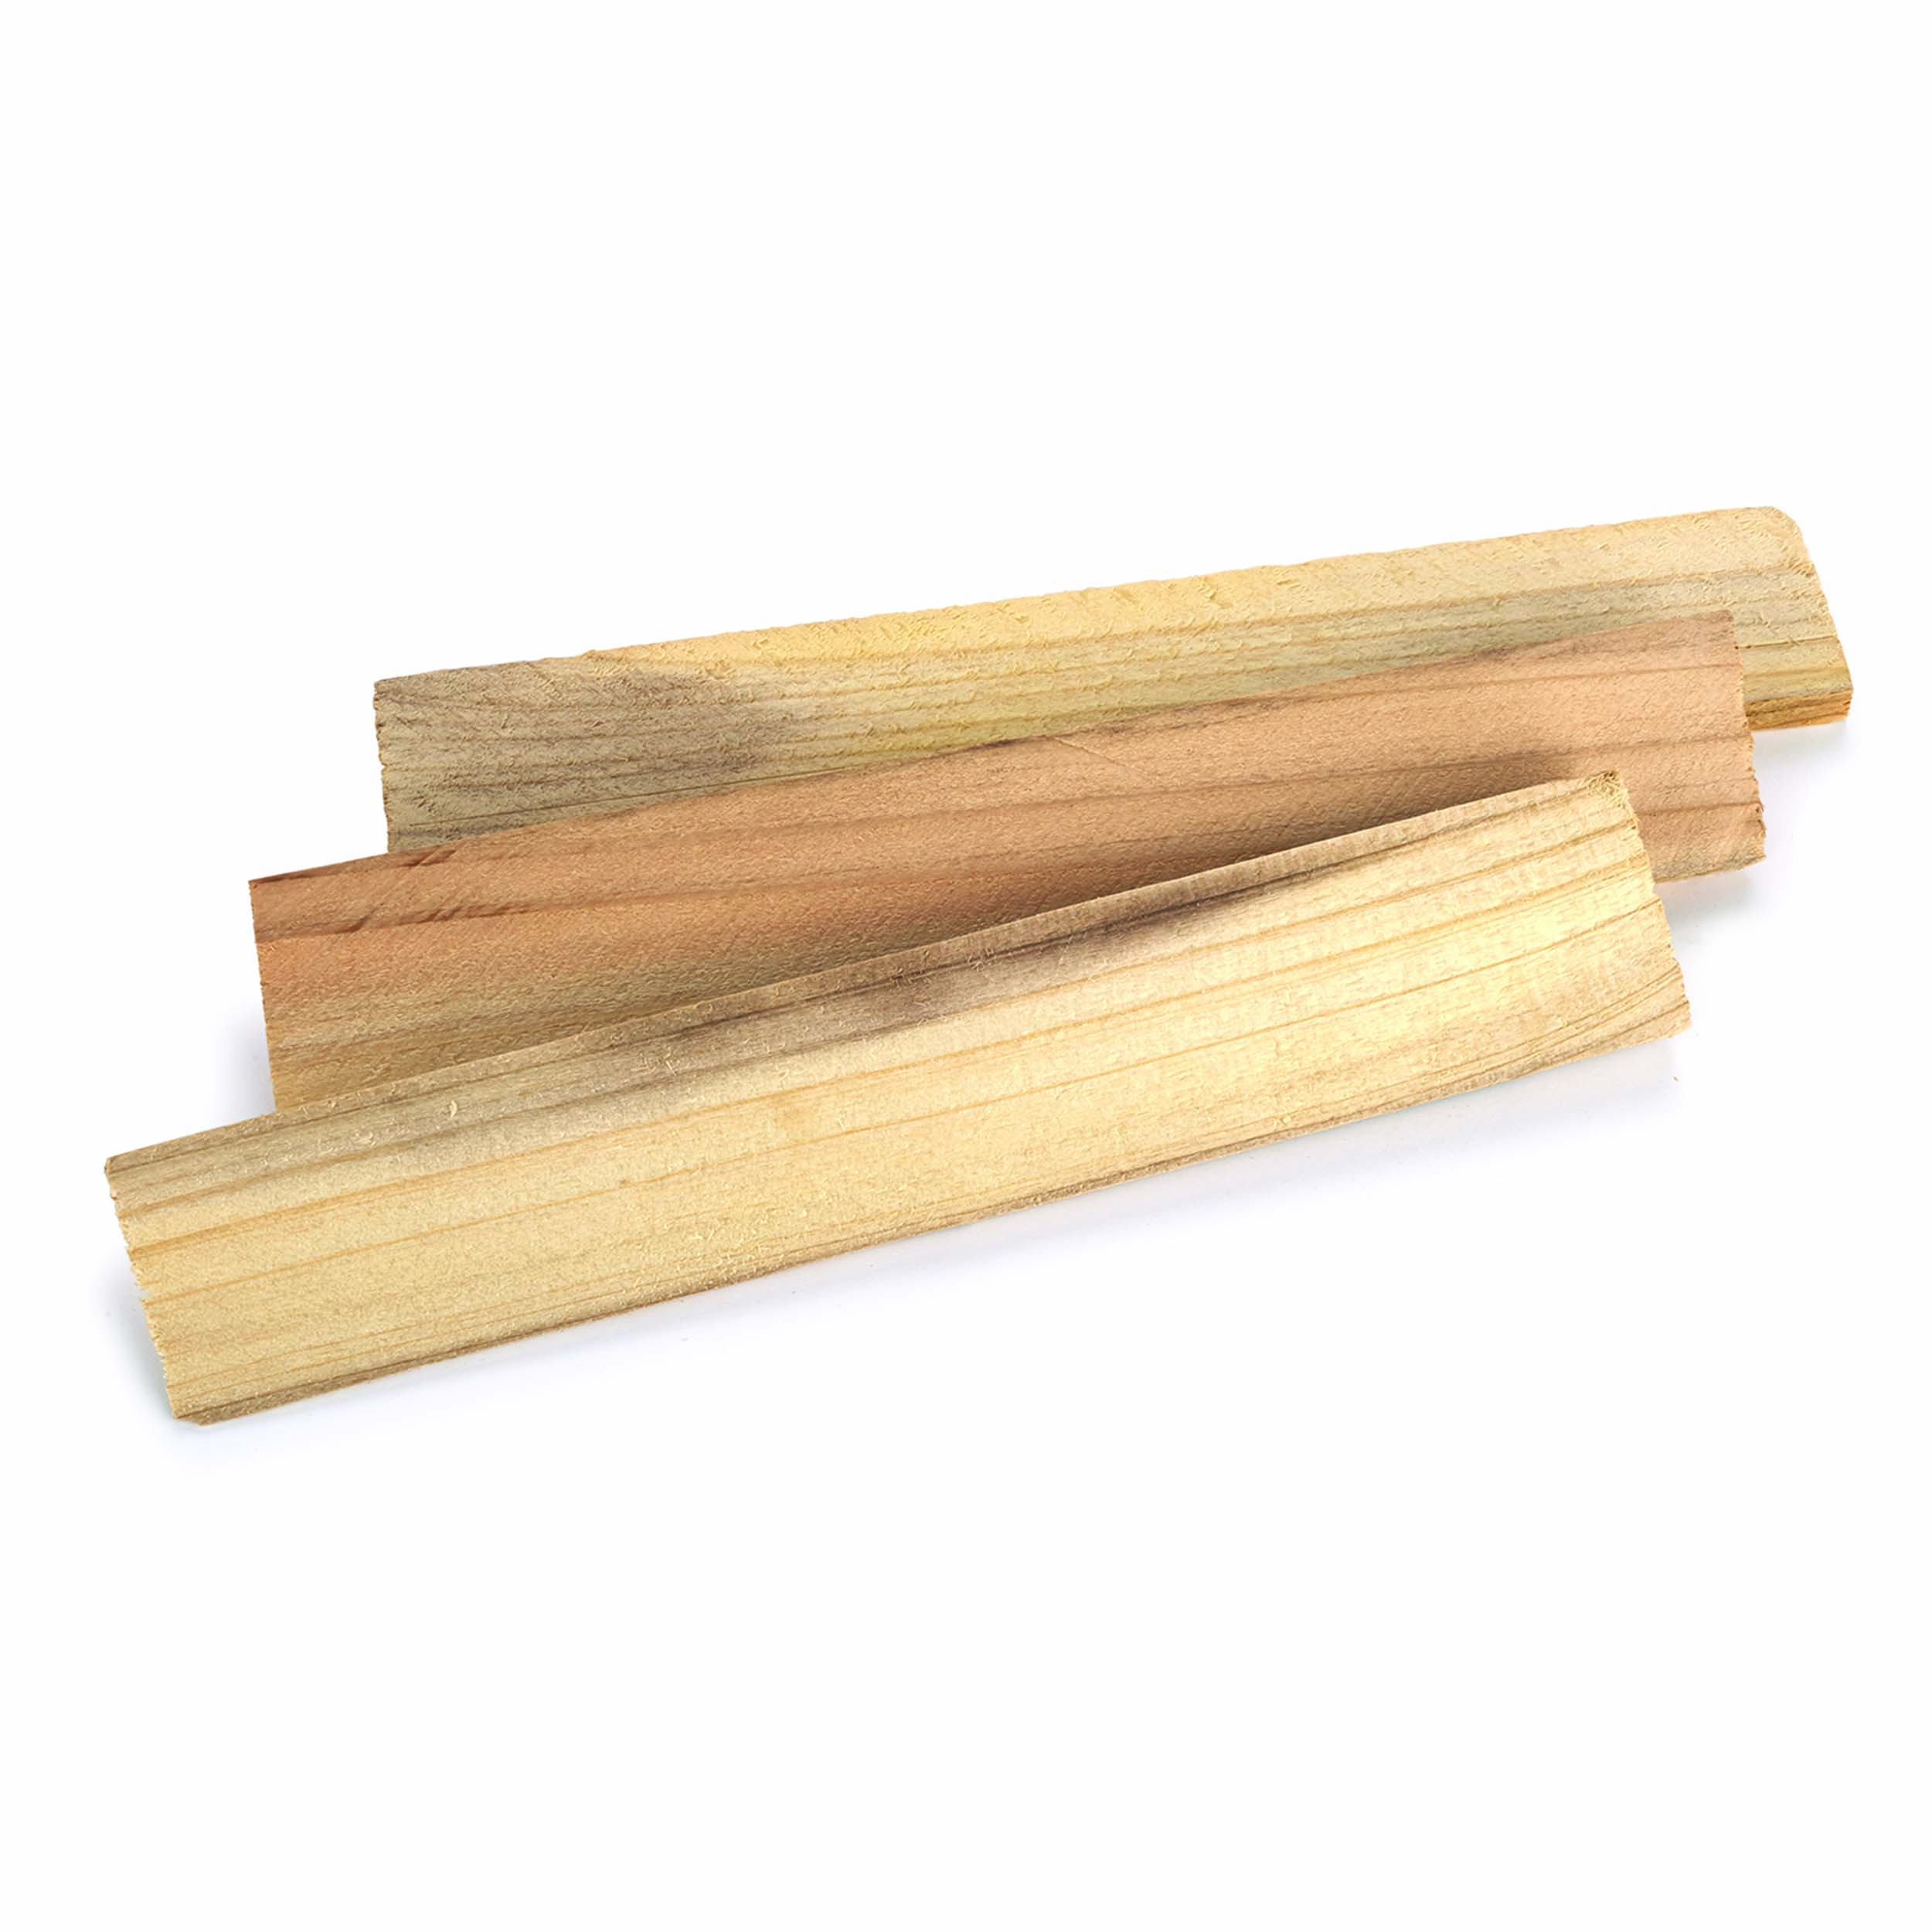 Wood Shims 14-count, 1-3/8" X 7-3/8"